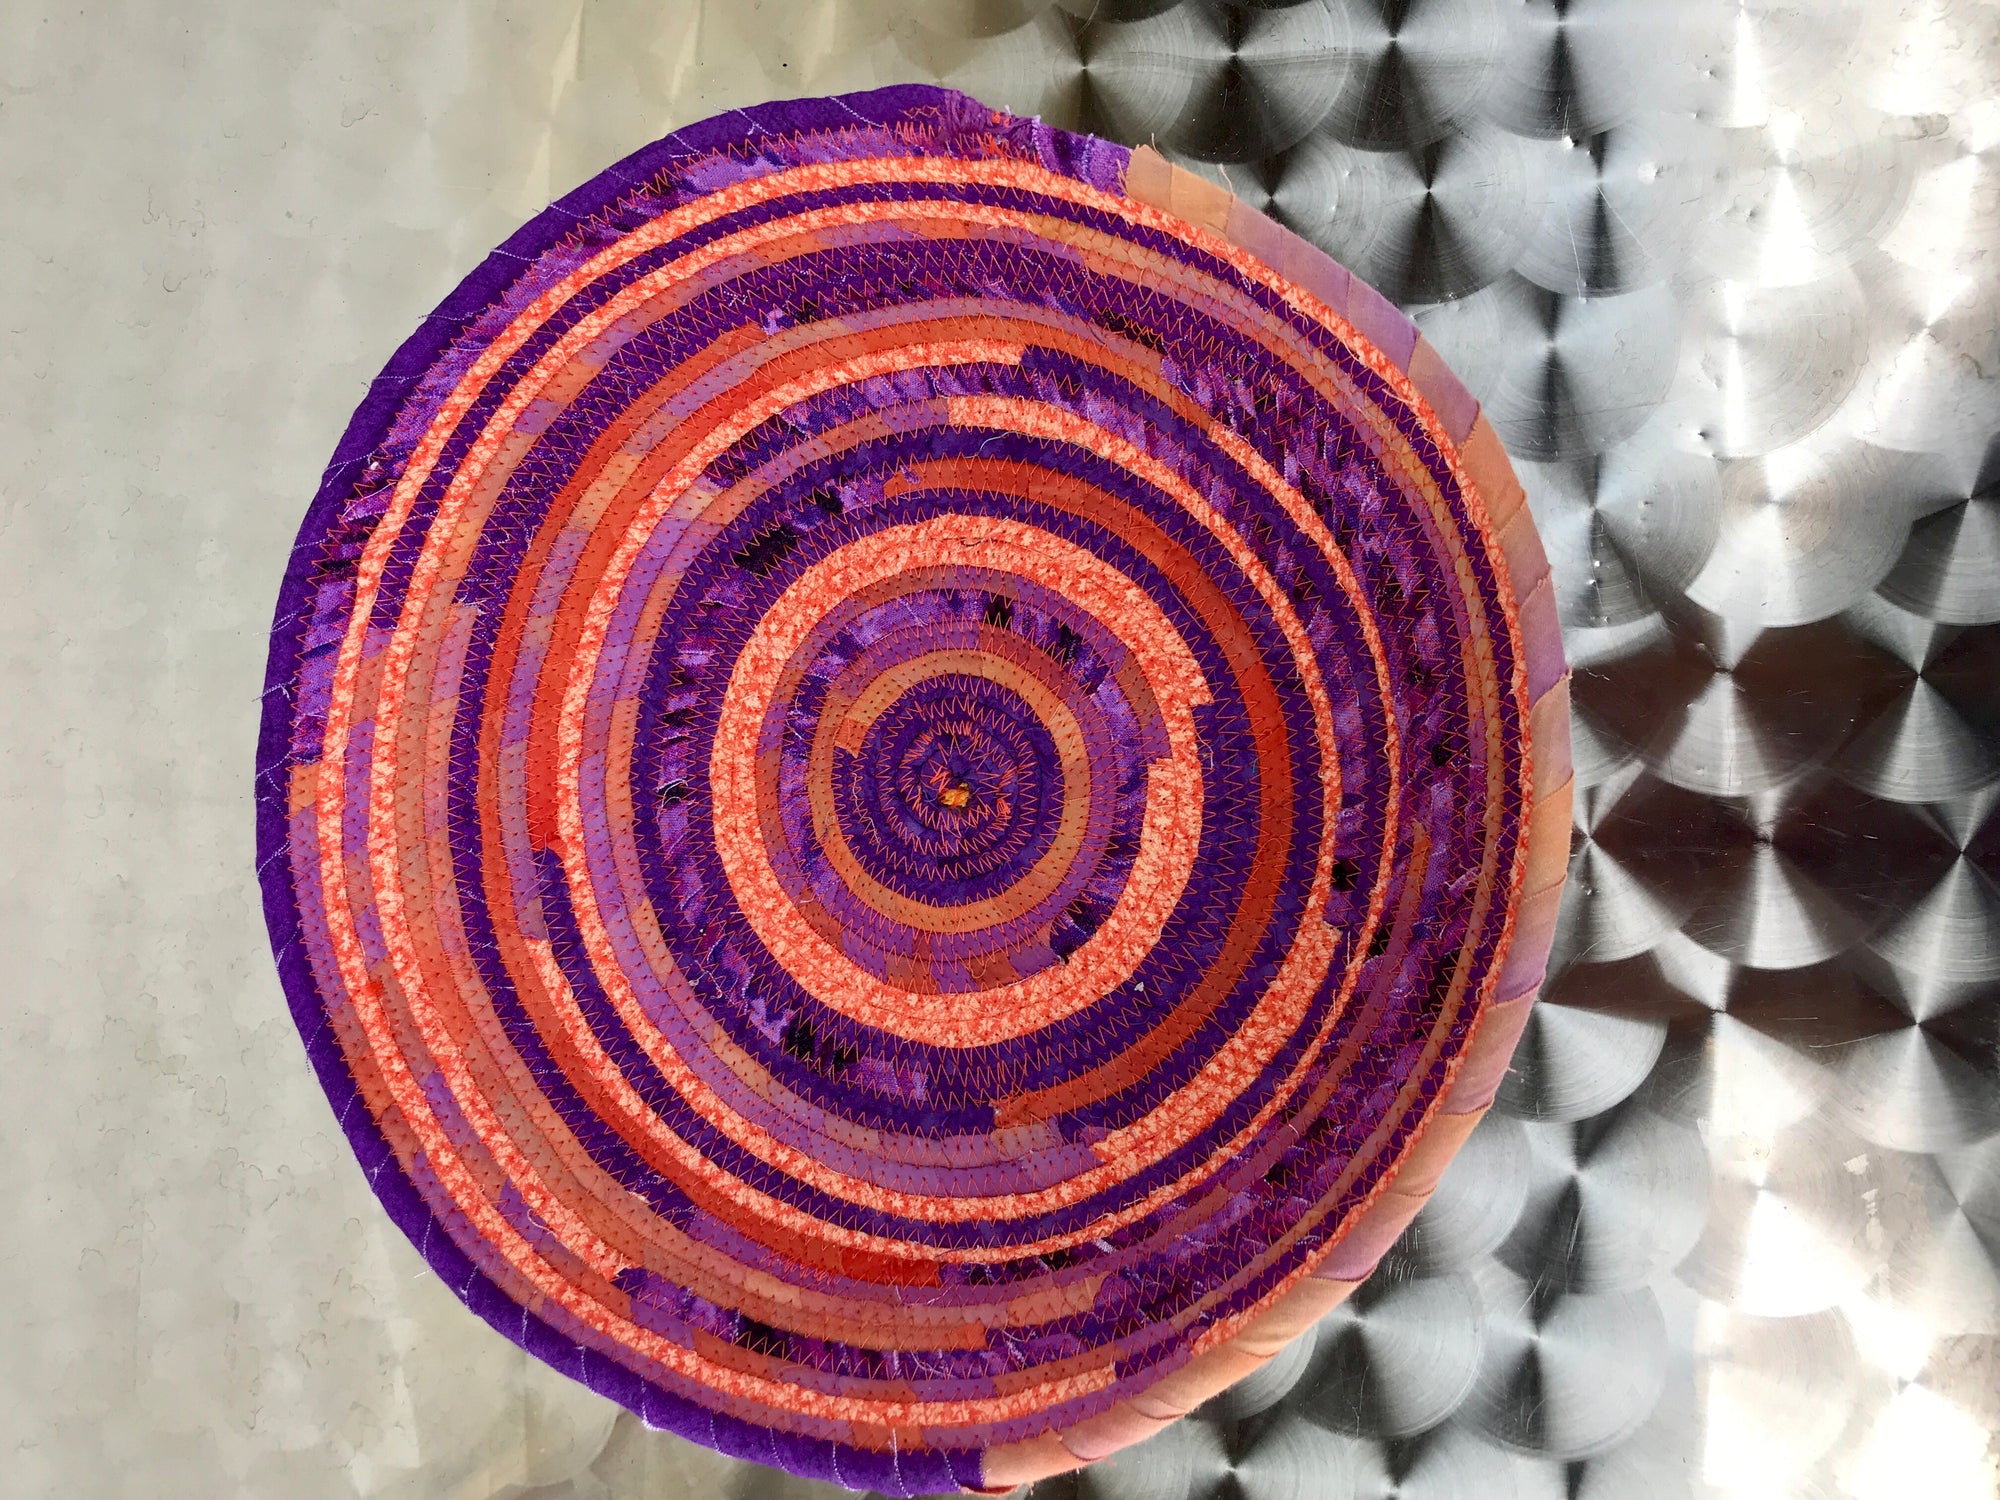 Fabric Wrapped Rolled Coil Bowl Orange and Purple Batik